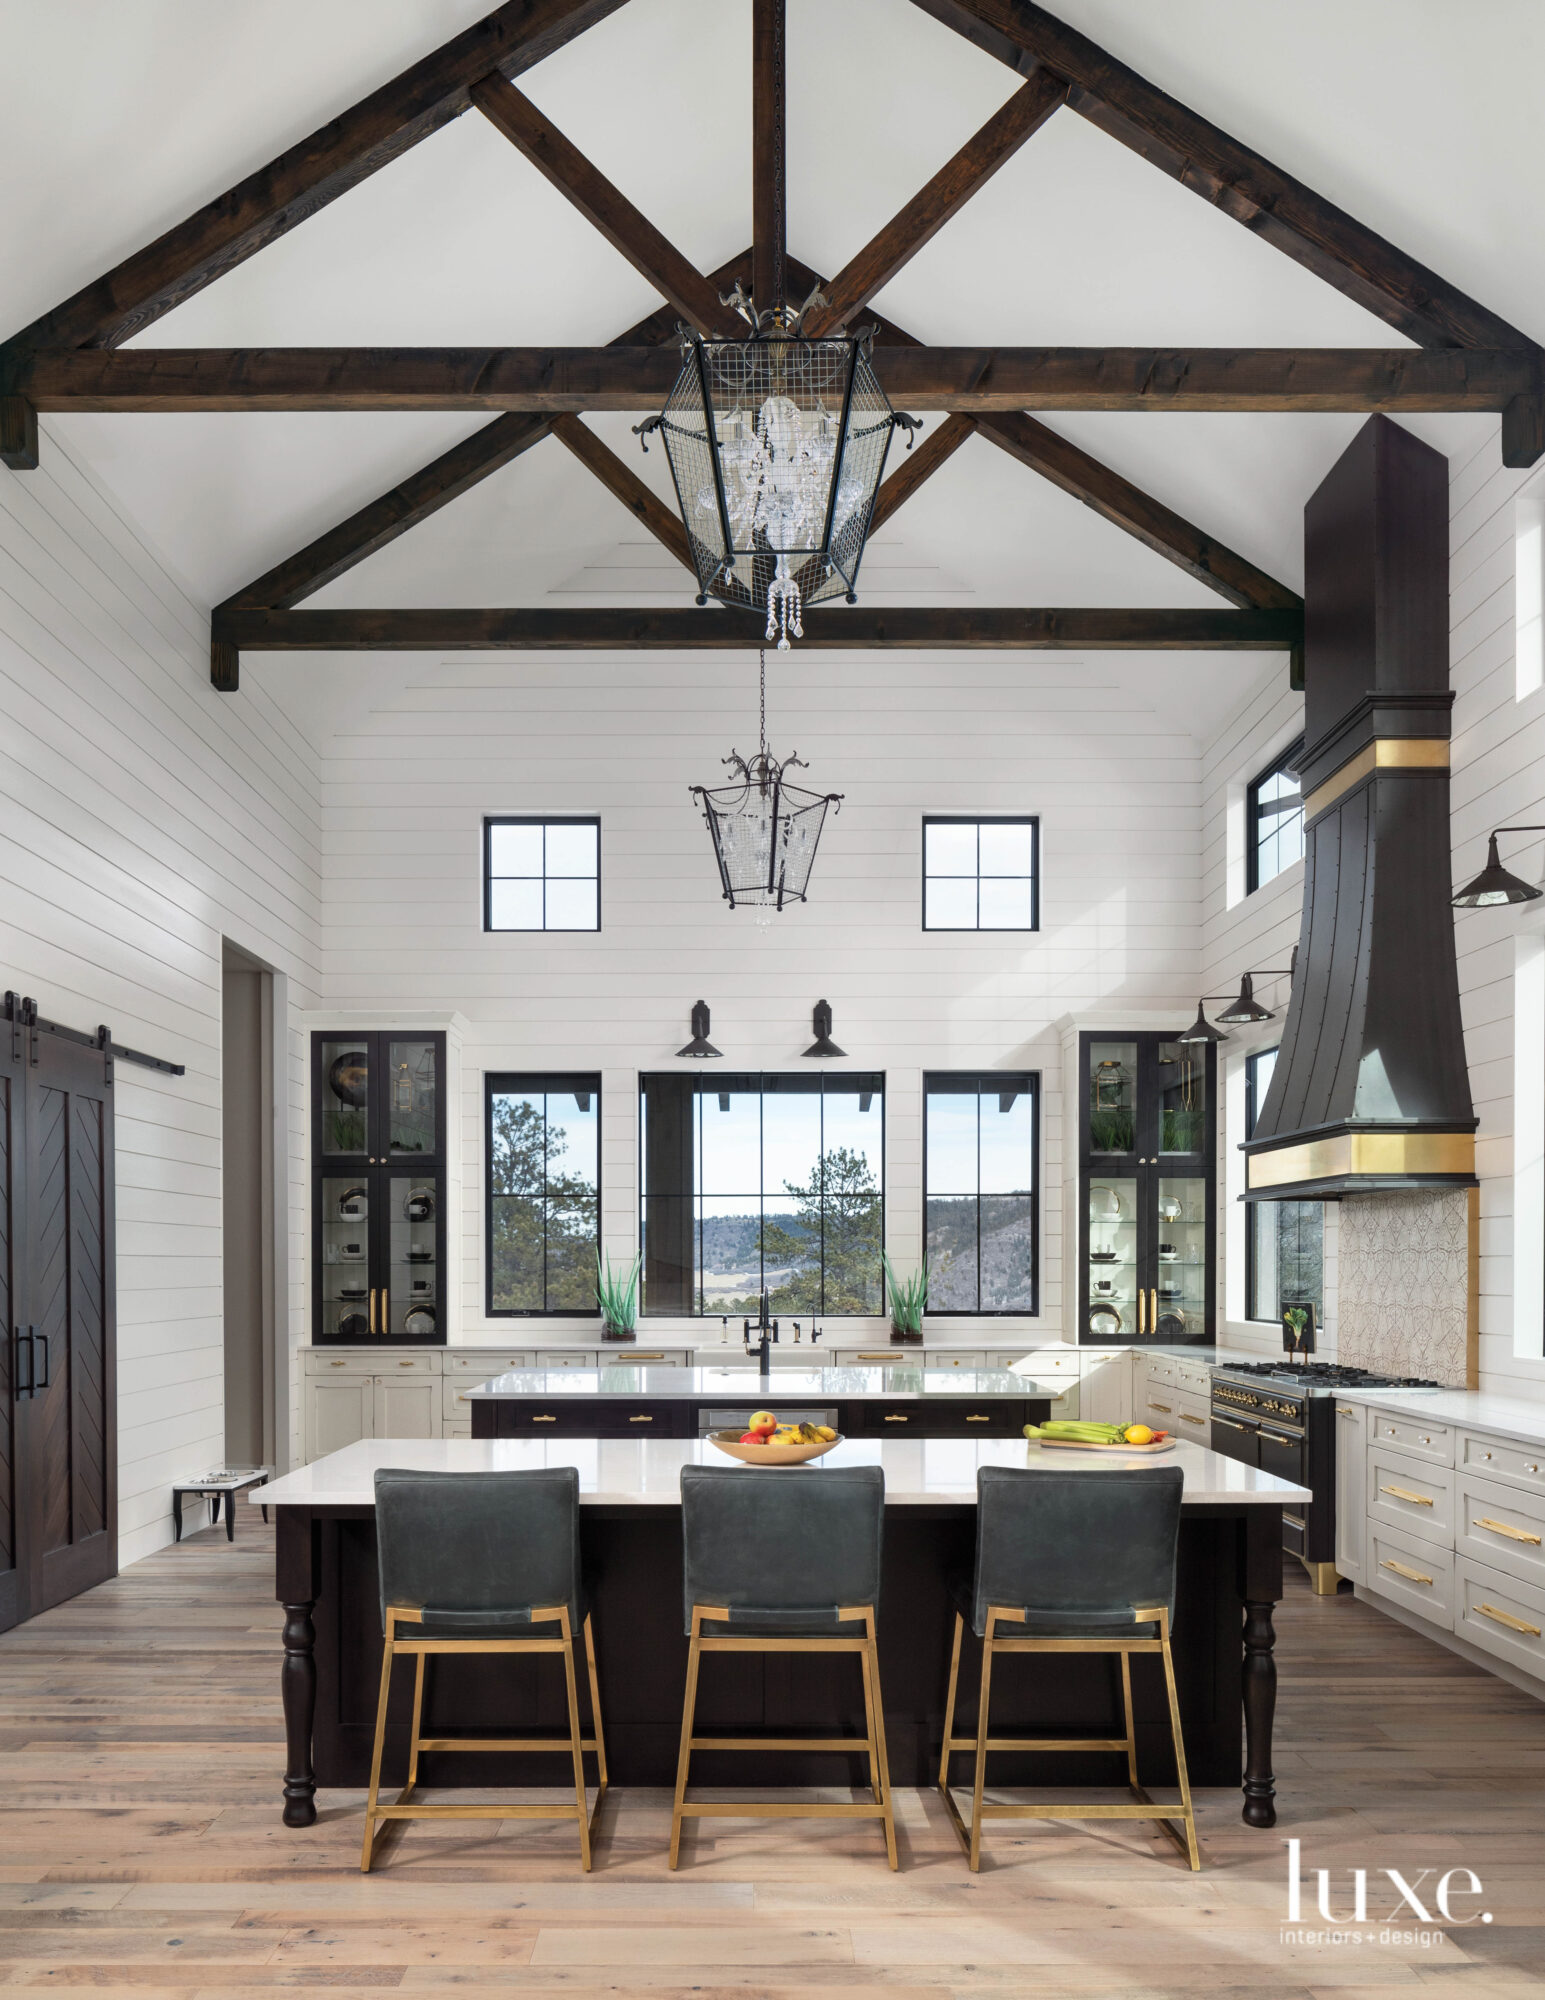 The kitchen has high ceilings and grand dimensions.